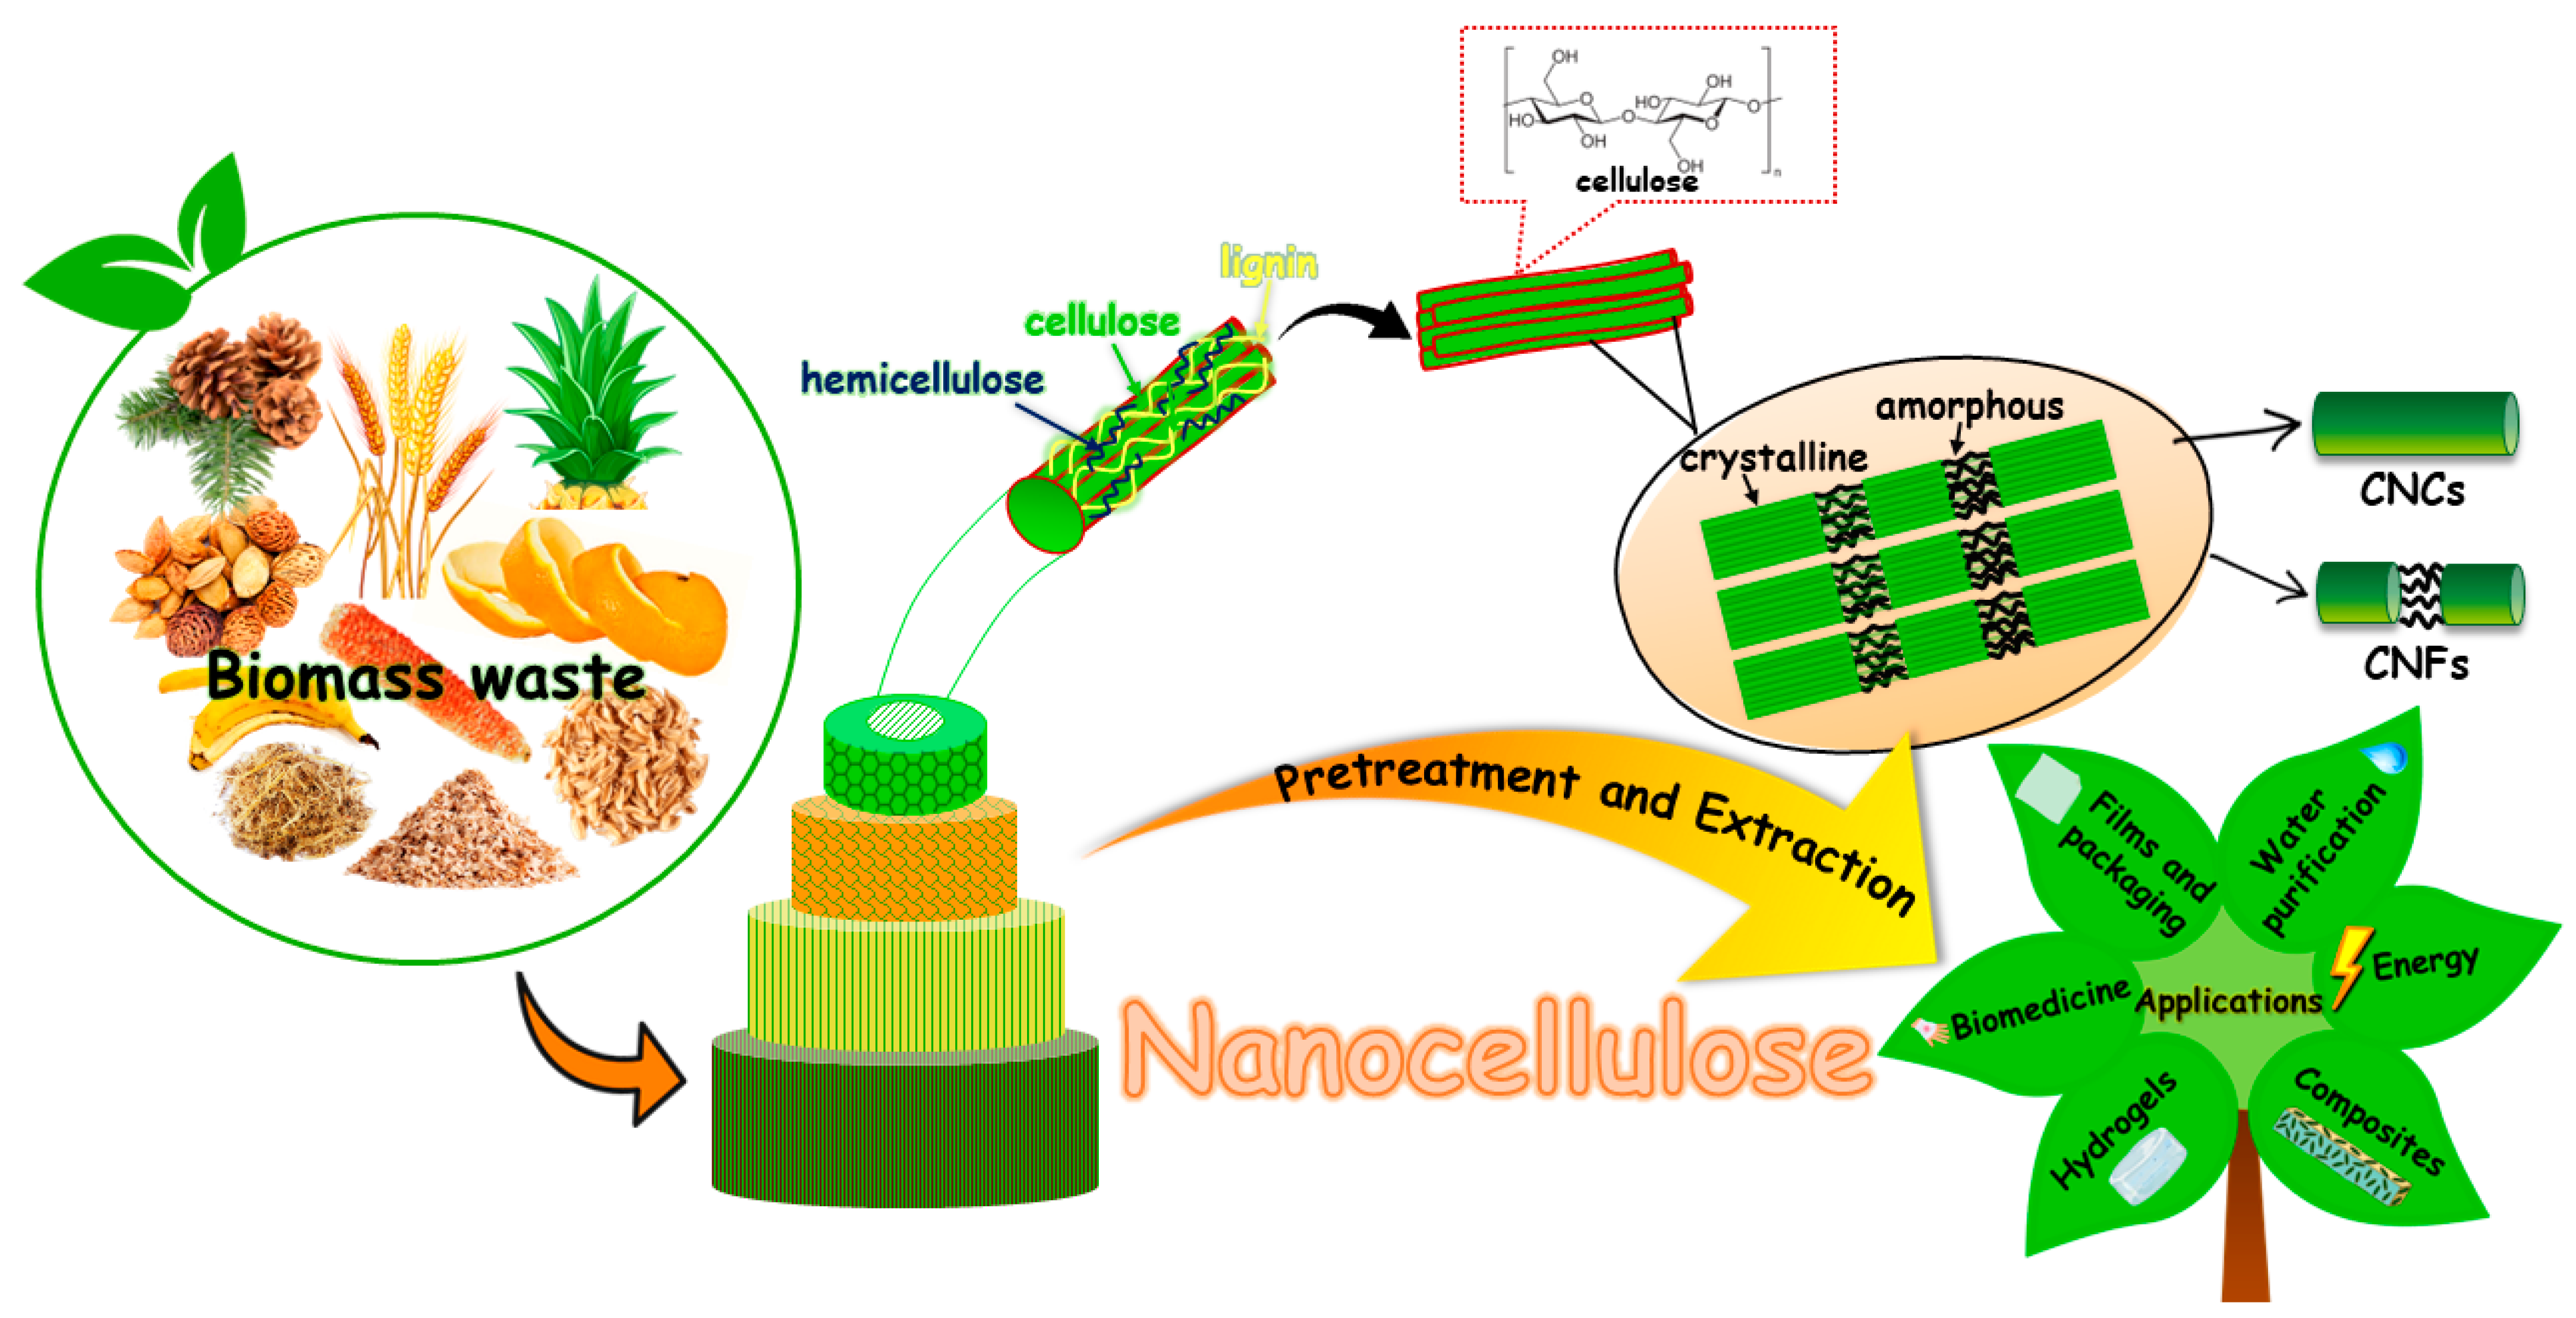 Nano Cellulose Vehicle highlights potential of plants, News